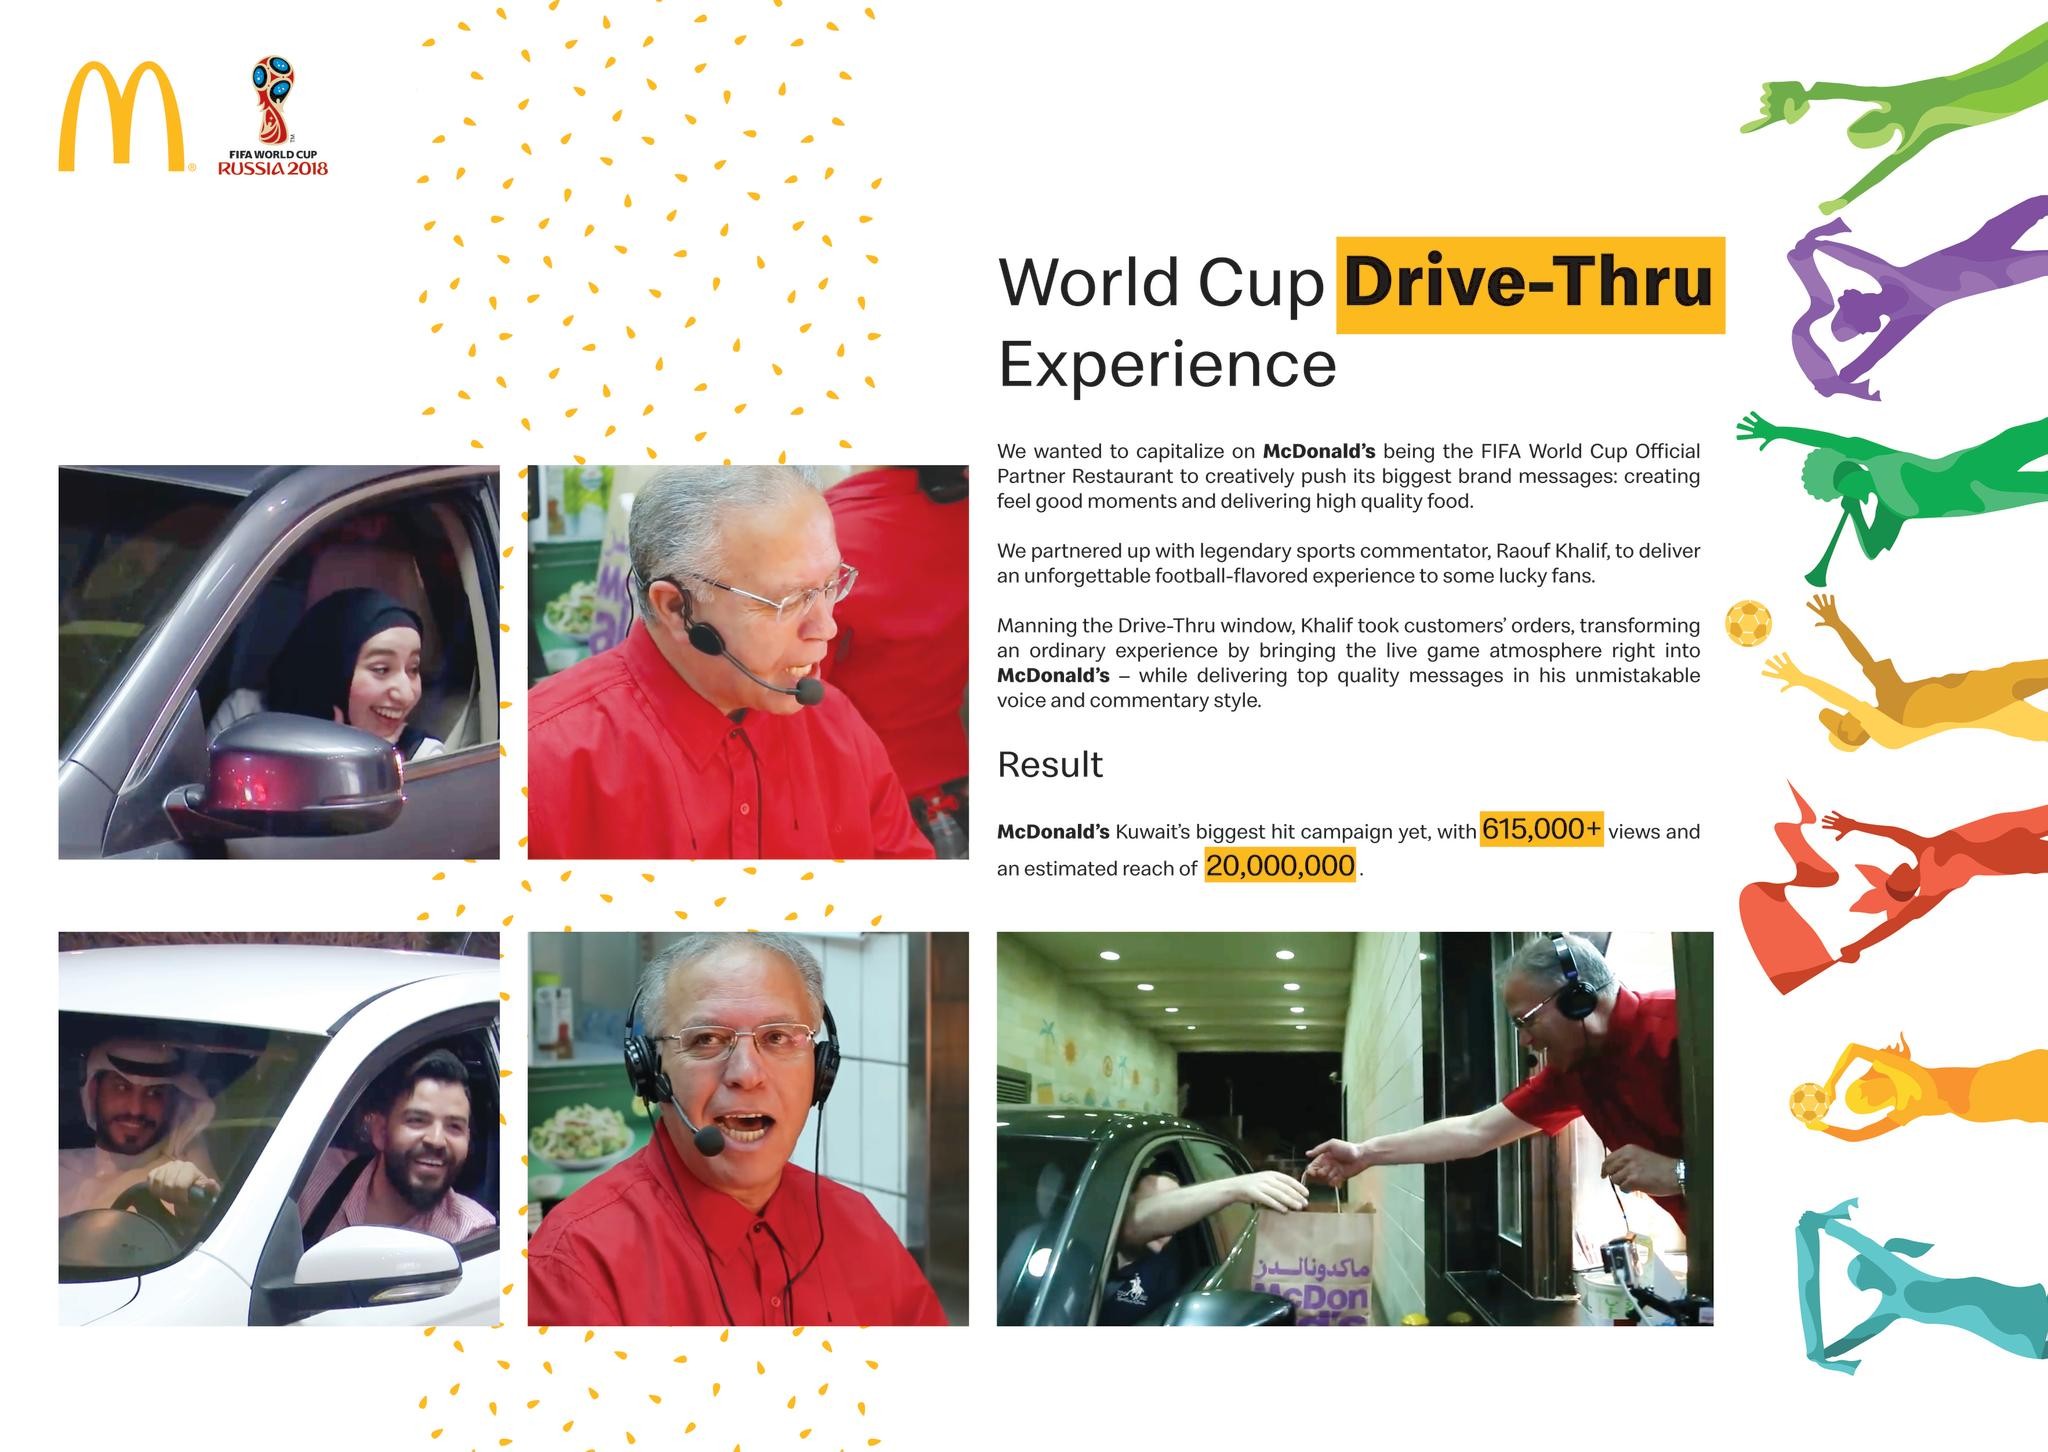 World Cup Drive-Thru Experience